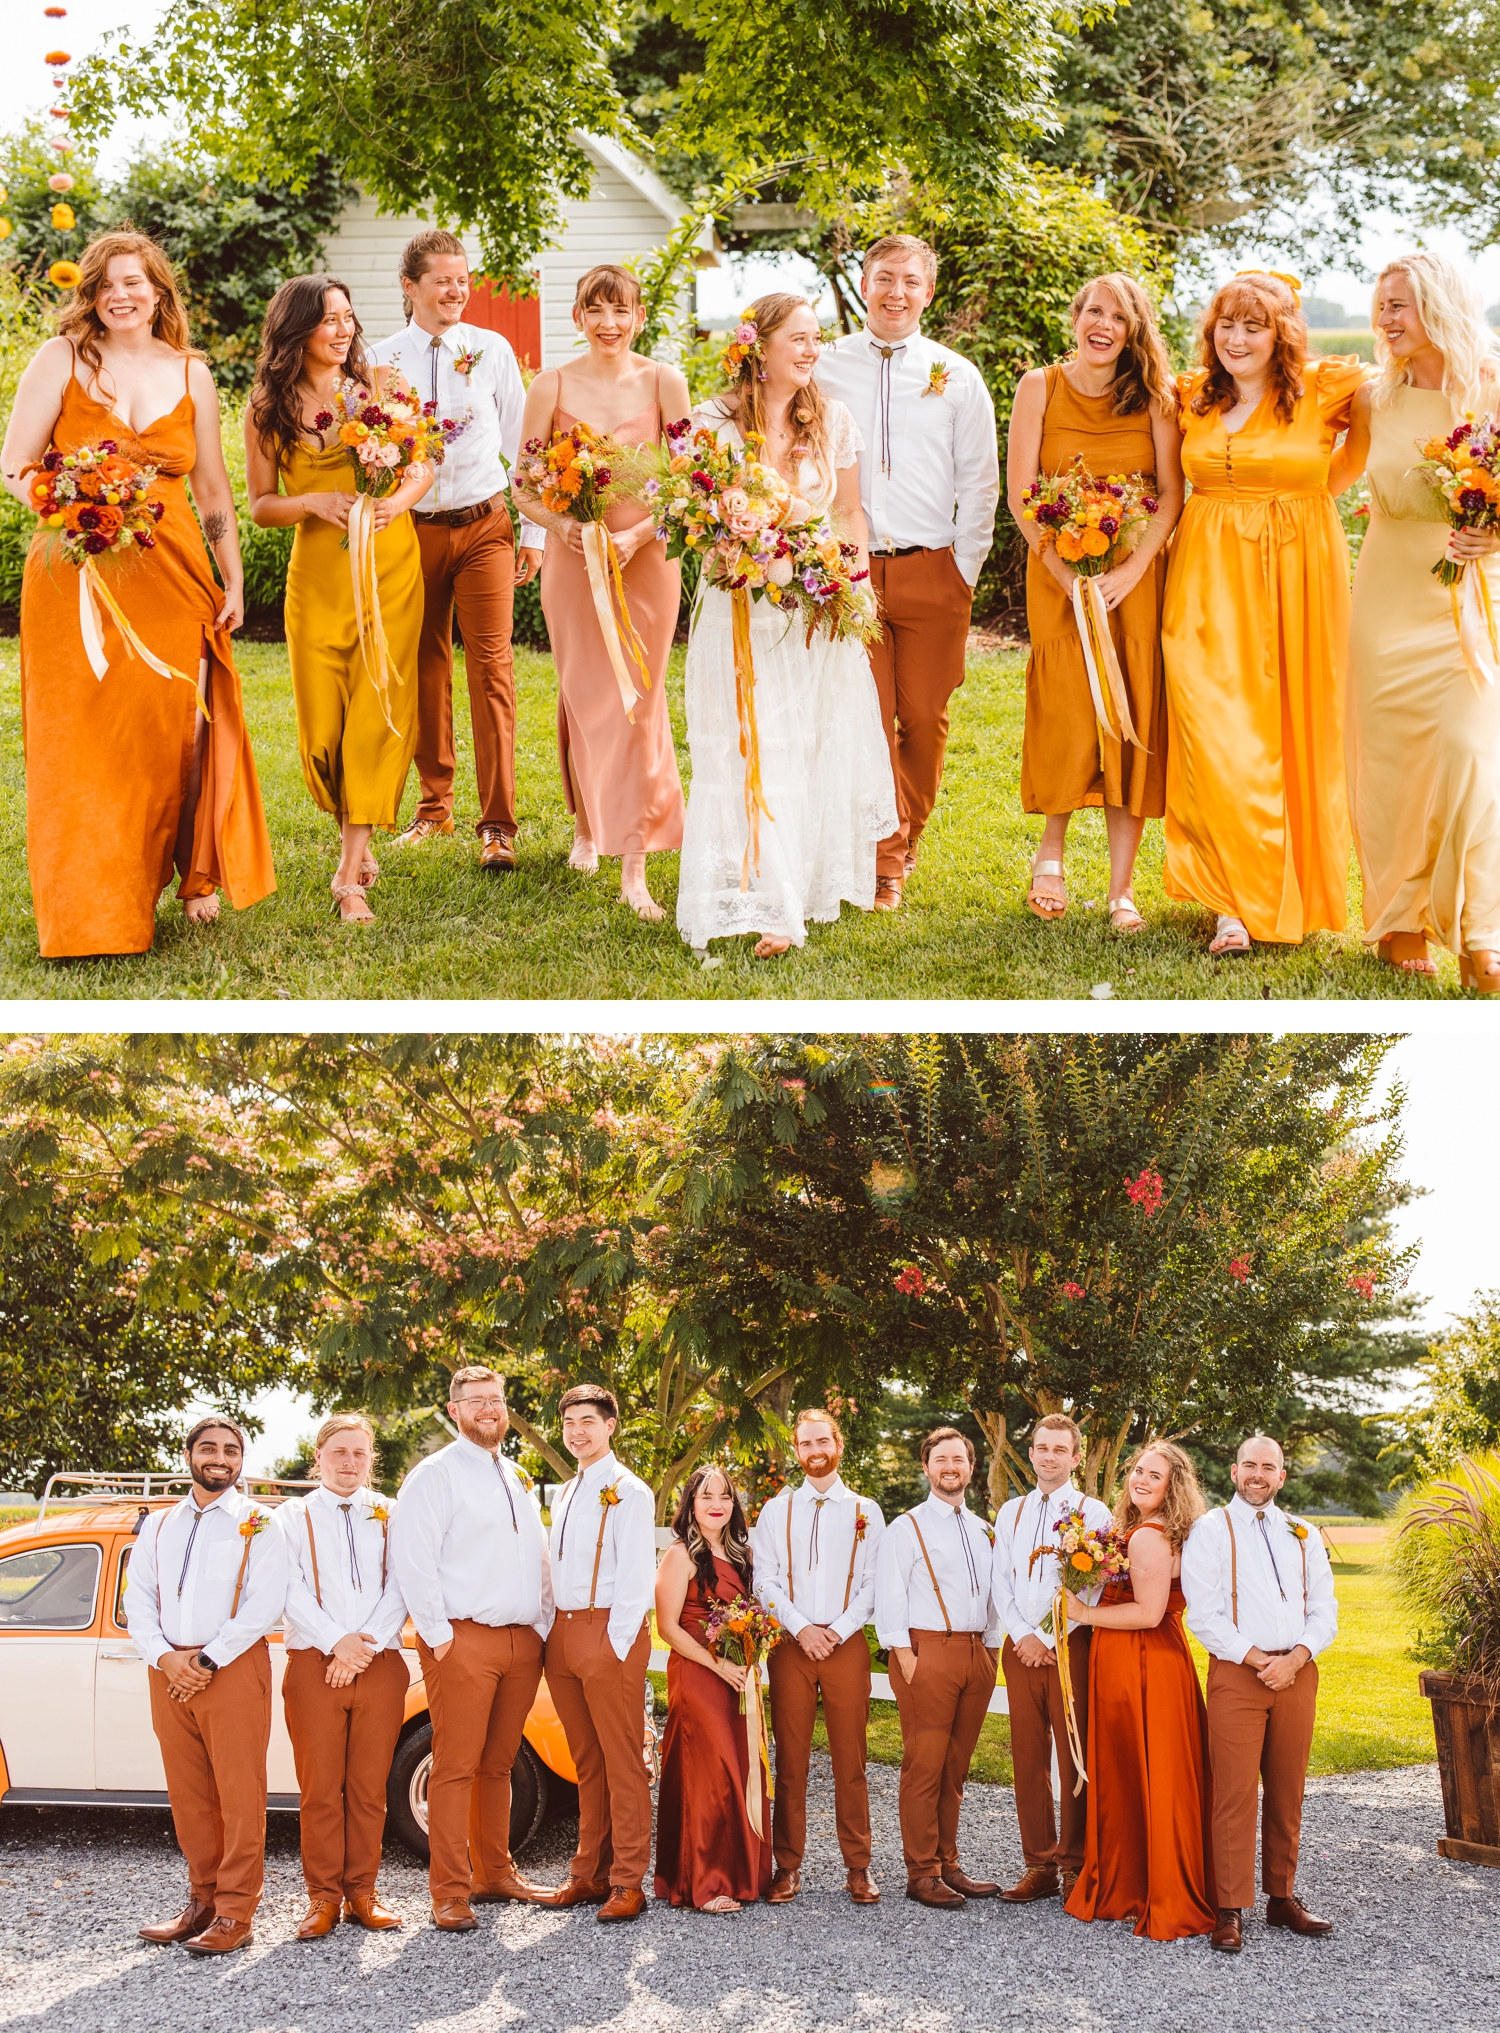 Colorful boho wedding party wearing orange and yellow dresses | groom with wedding party wearing orange pants and bolo tie | Brooke Michelle Photography